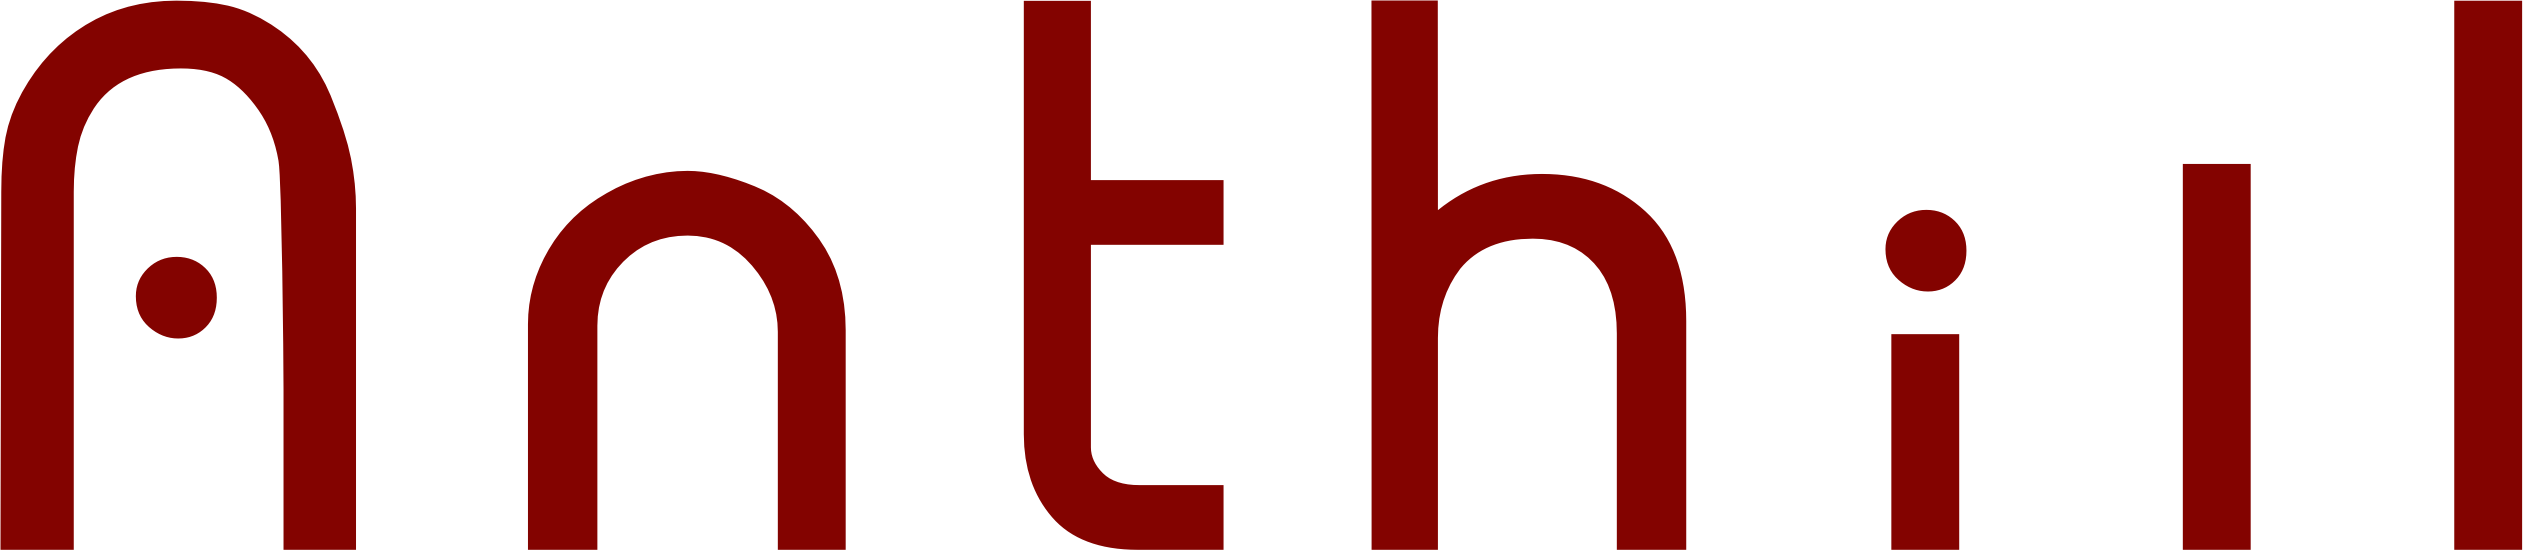 T-hub And Anthill Have Joined Hands To Redefine Corporate - Anthill Ventures (2523x550)